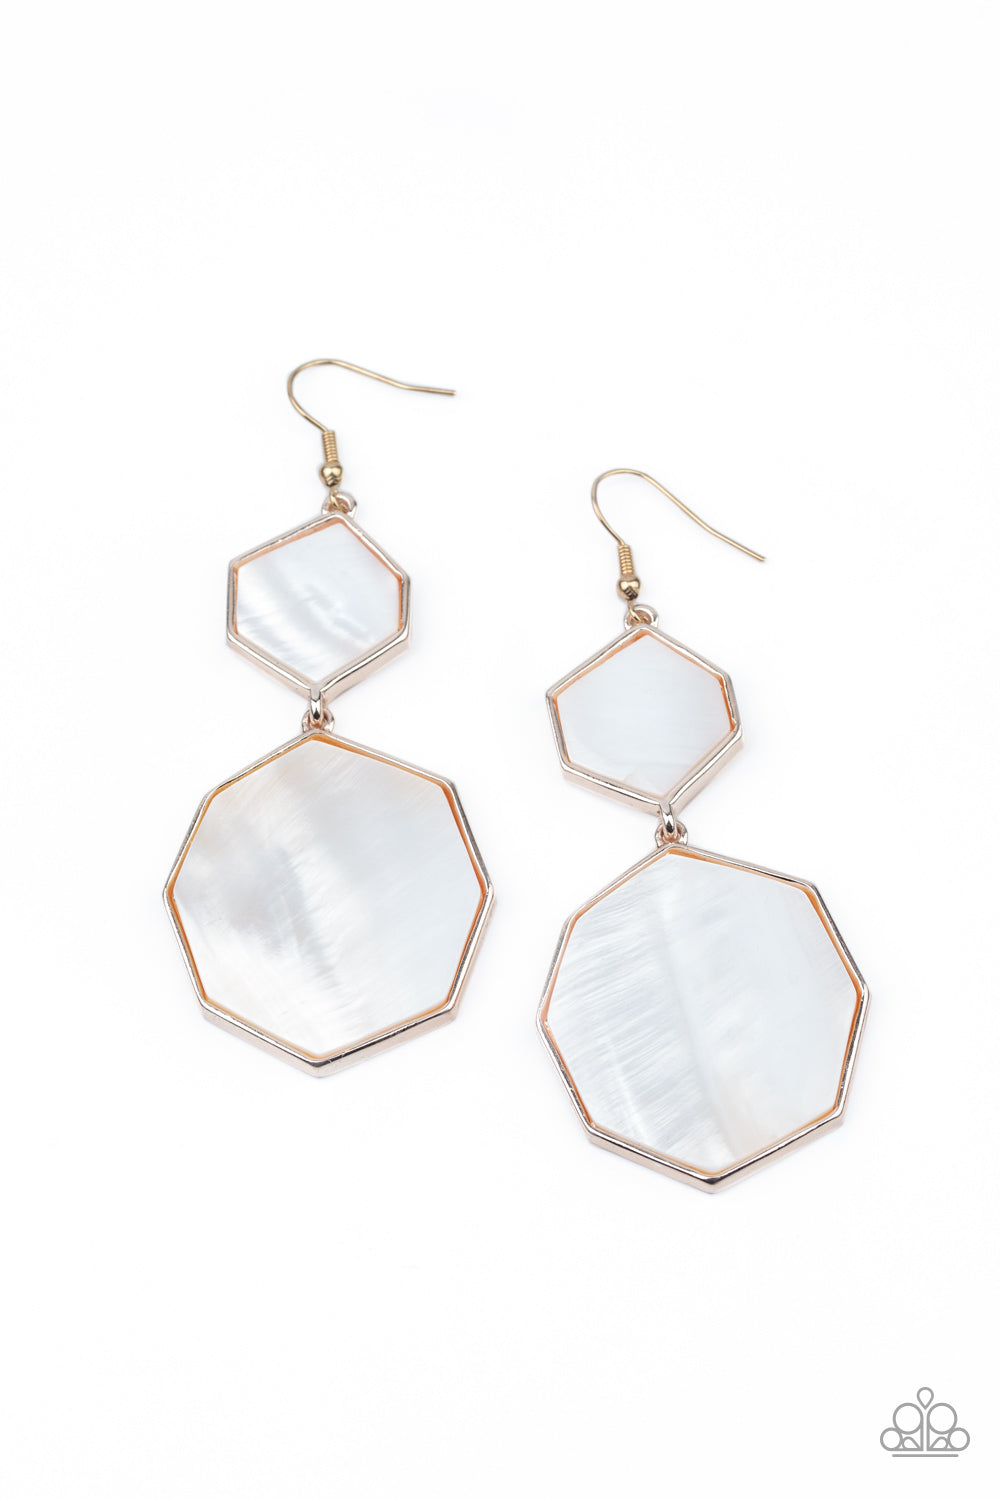 Encased in sleek rose gold frames, white shell-like hexagonal frames link into a whimsical lure. Paparazzi Accessories are nickel-free and lead free. 